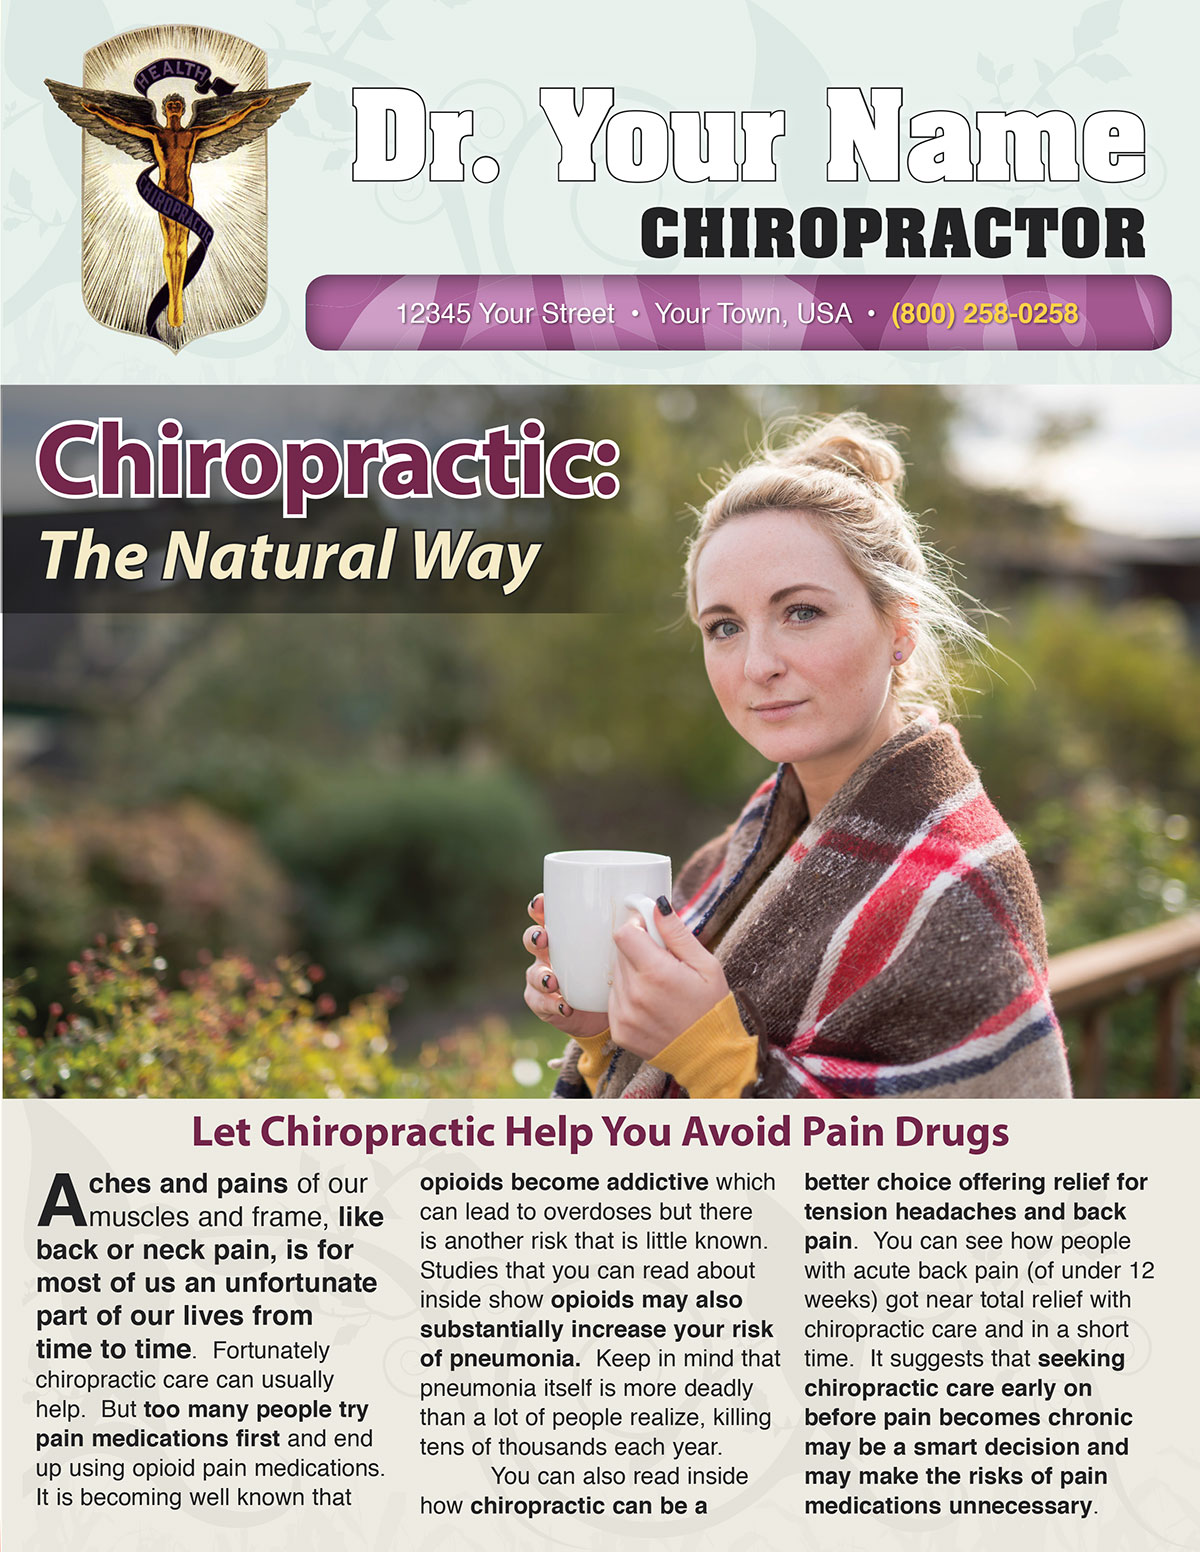 Chiropractic: The Natural Way